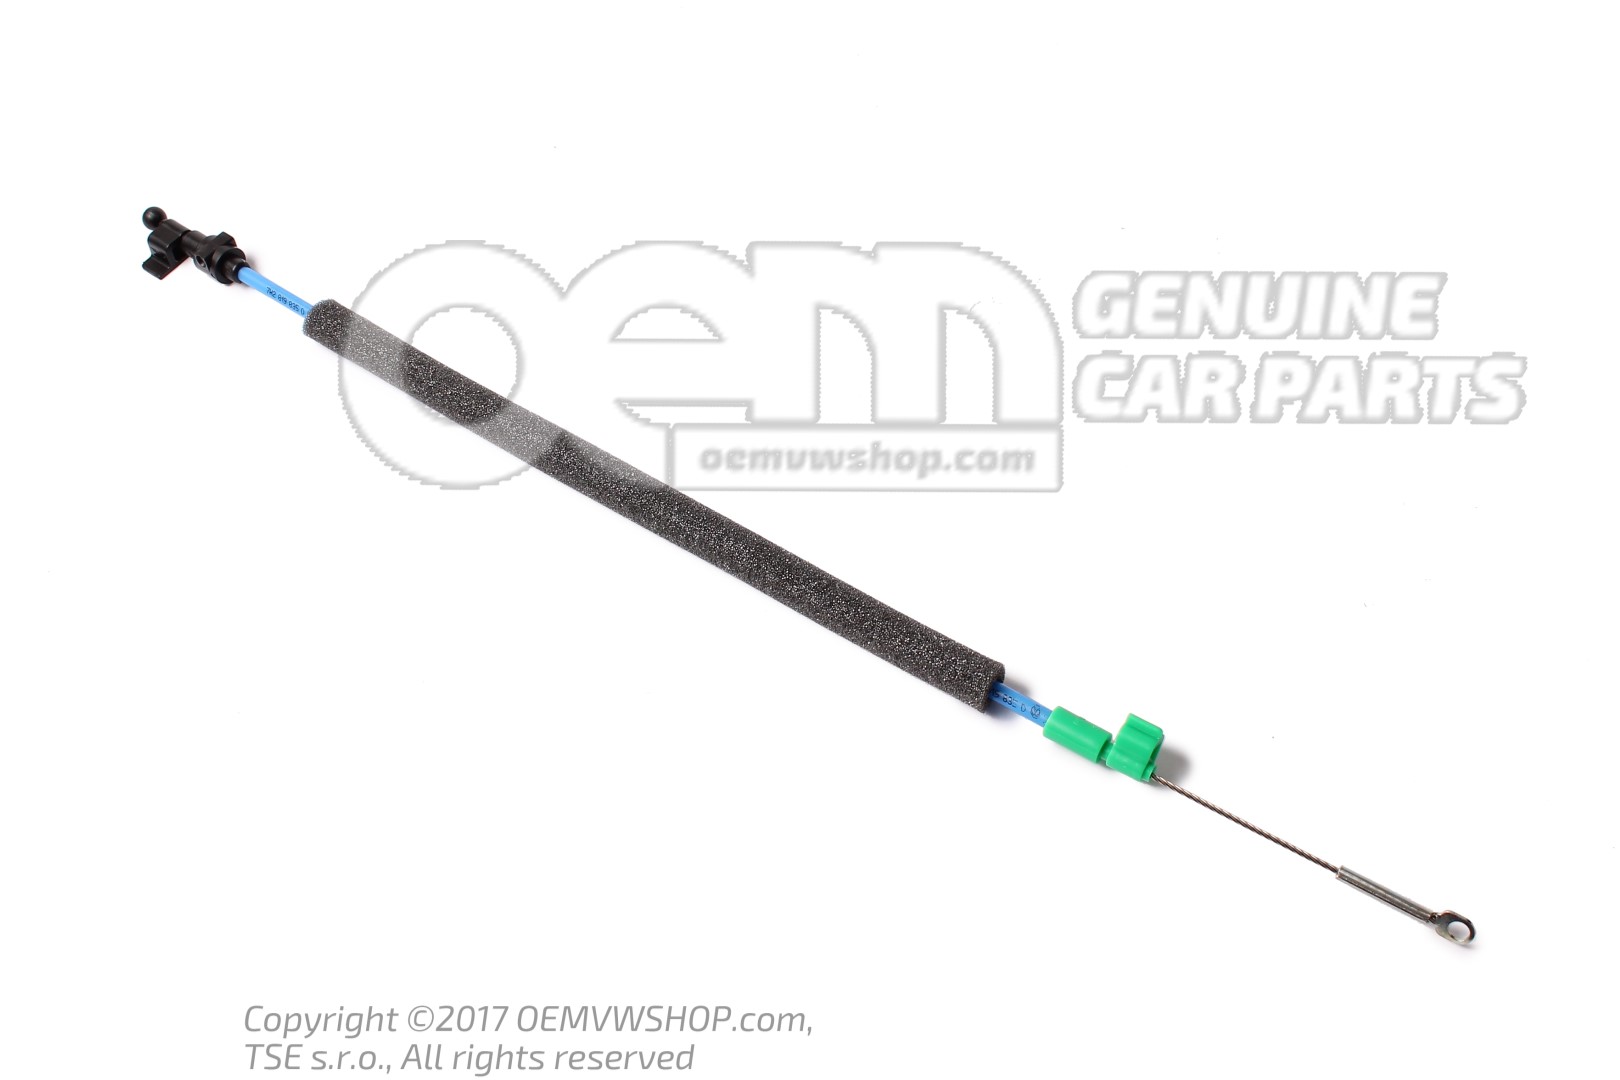 Volkswagen Amarok 2H Green Defroster Flap Cable LHD 7H1819835C NEW GENUINE